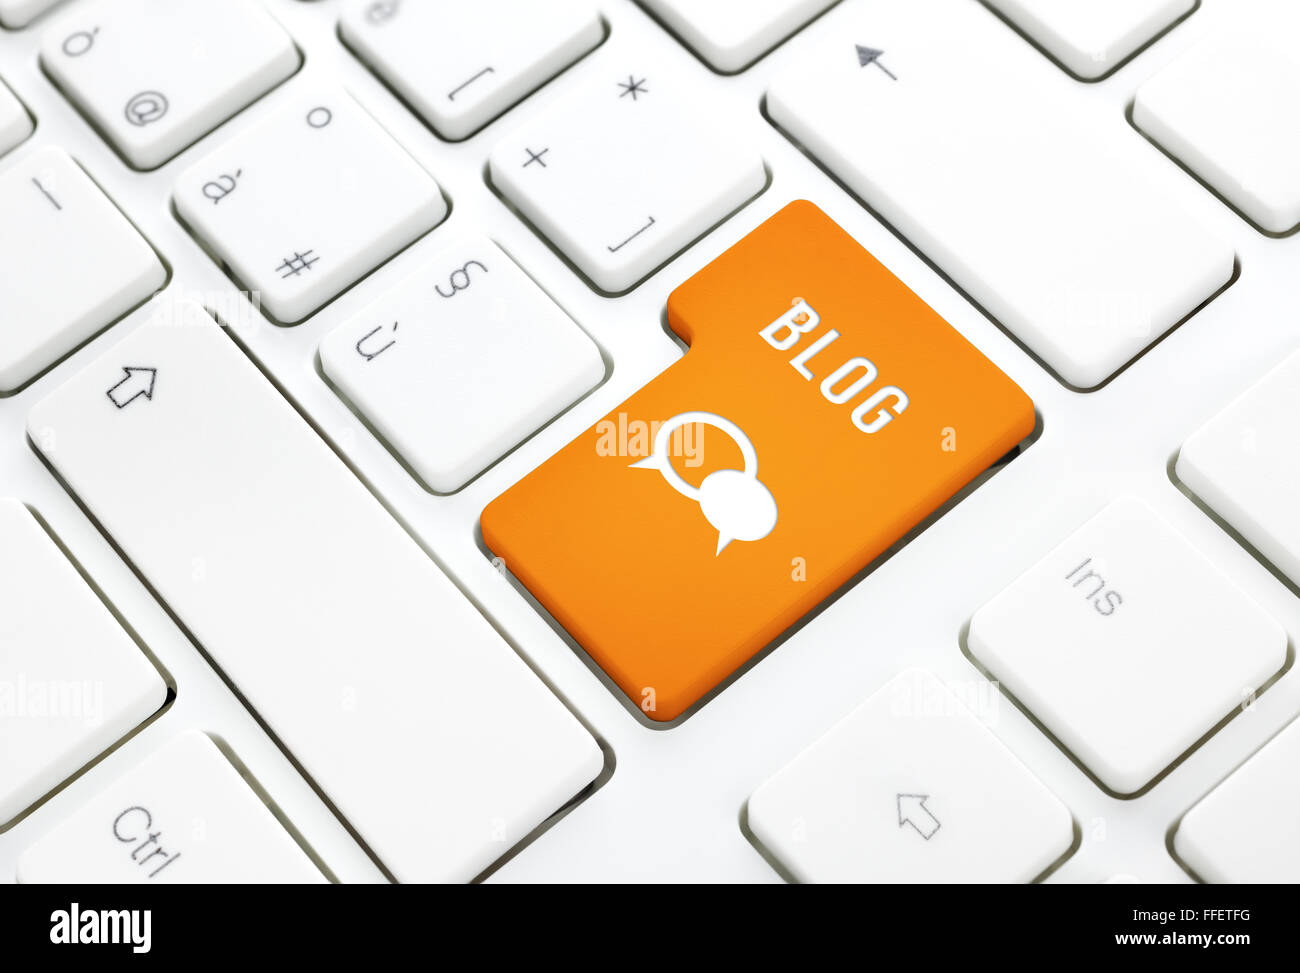 Blog business concept, text and icon. Orange enter button or key on white keyboard photography. Stock Photo